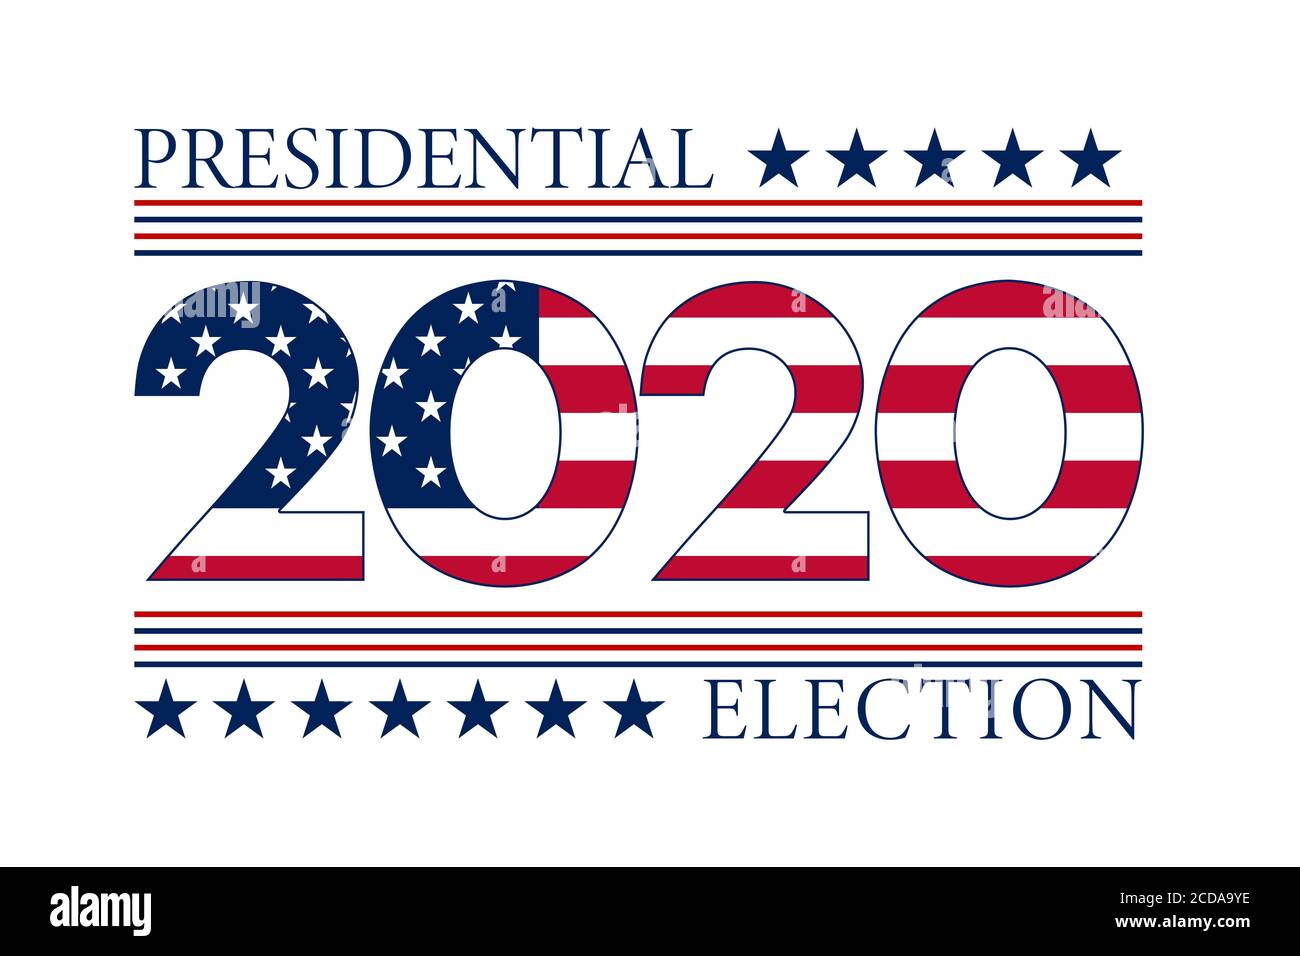 a 2020 presidential election american flag overlay slide card illustration graphic Stock Photo